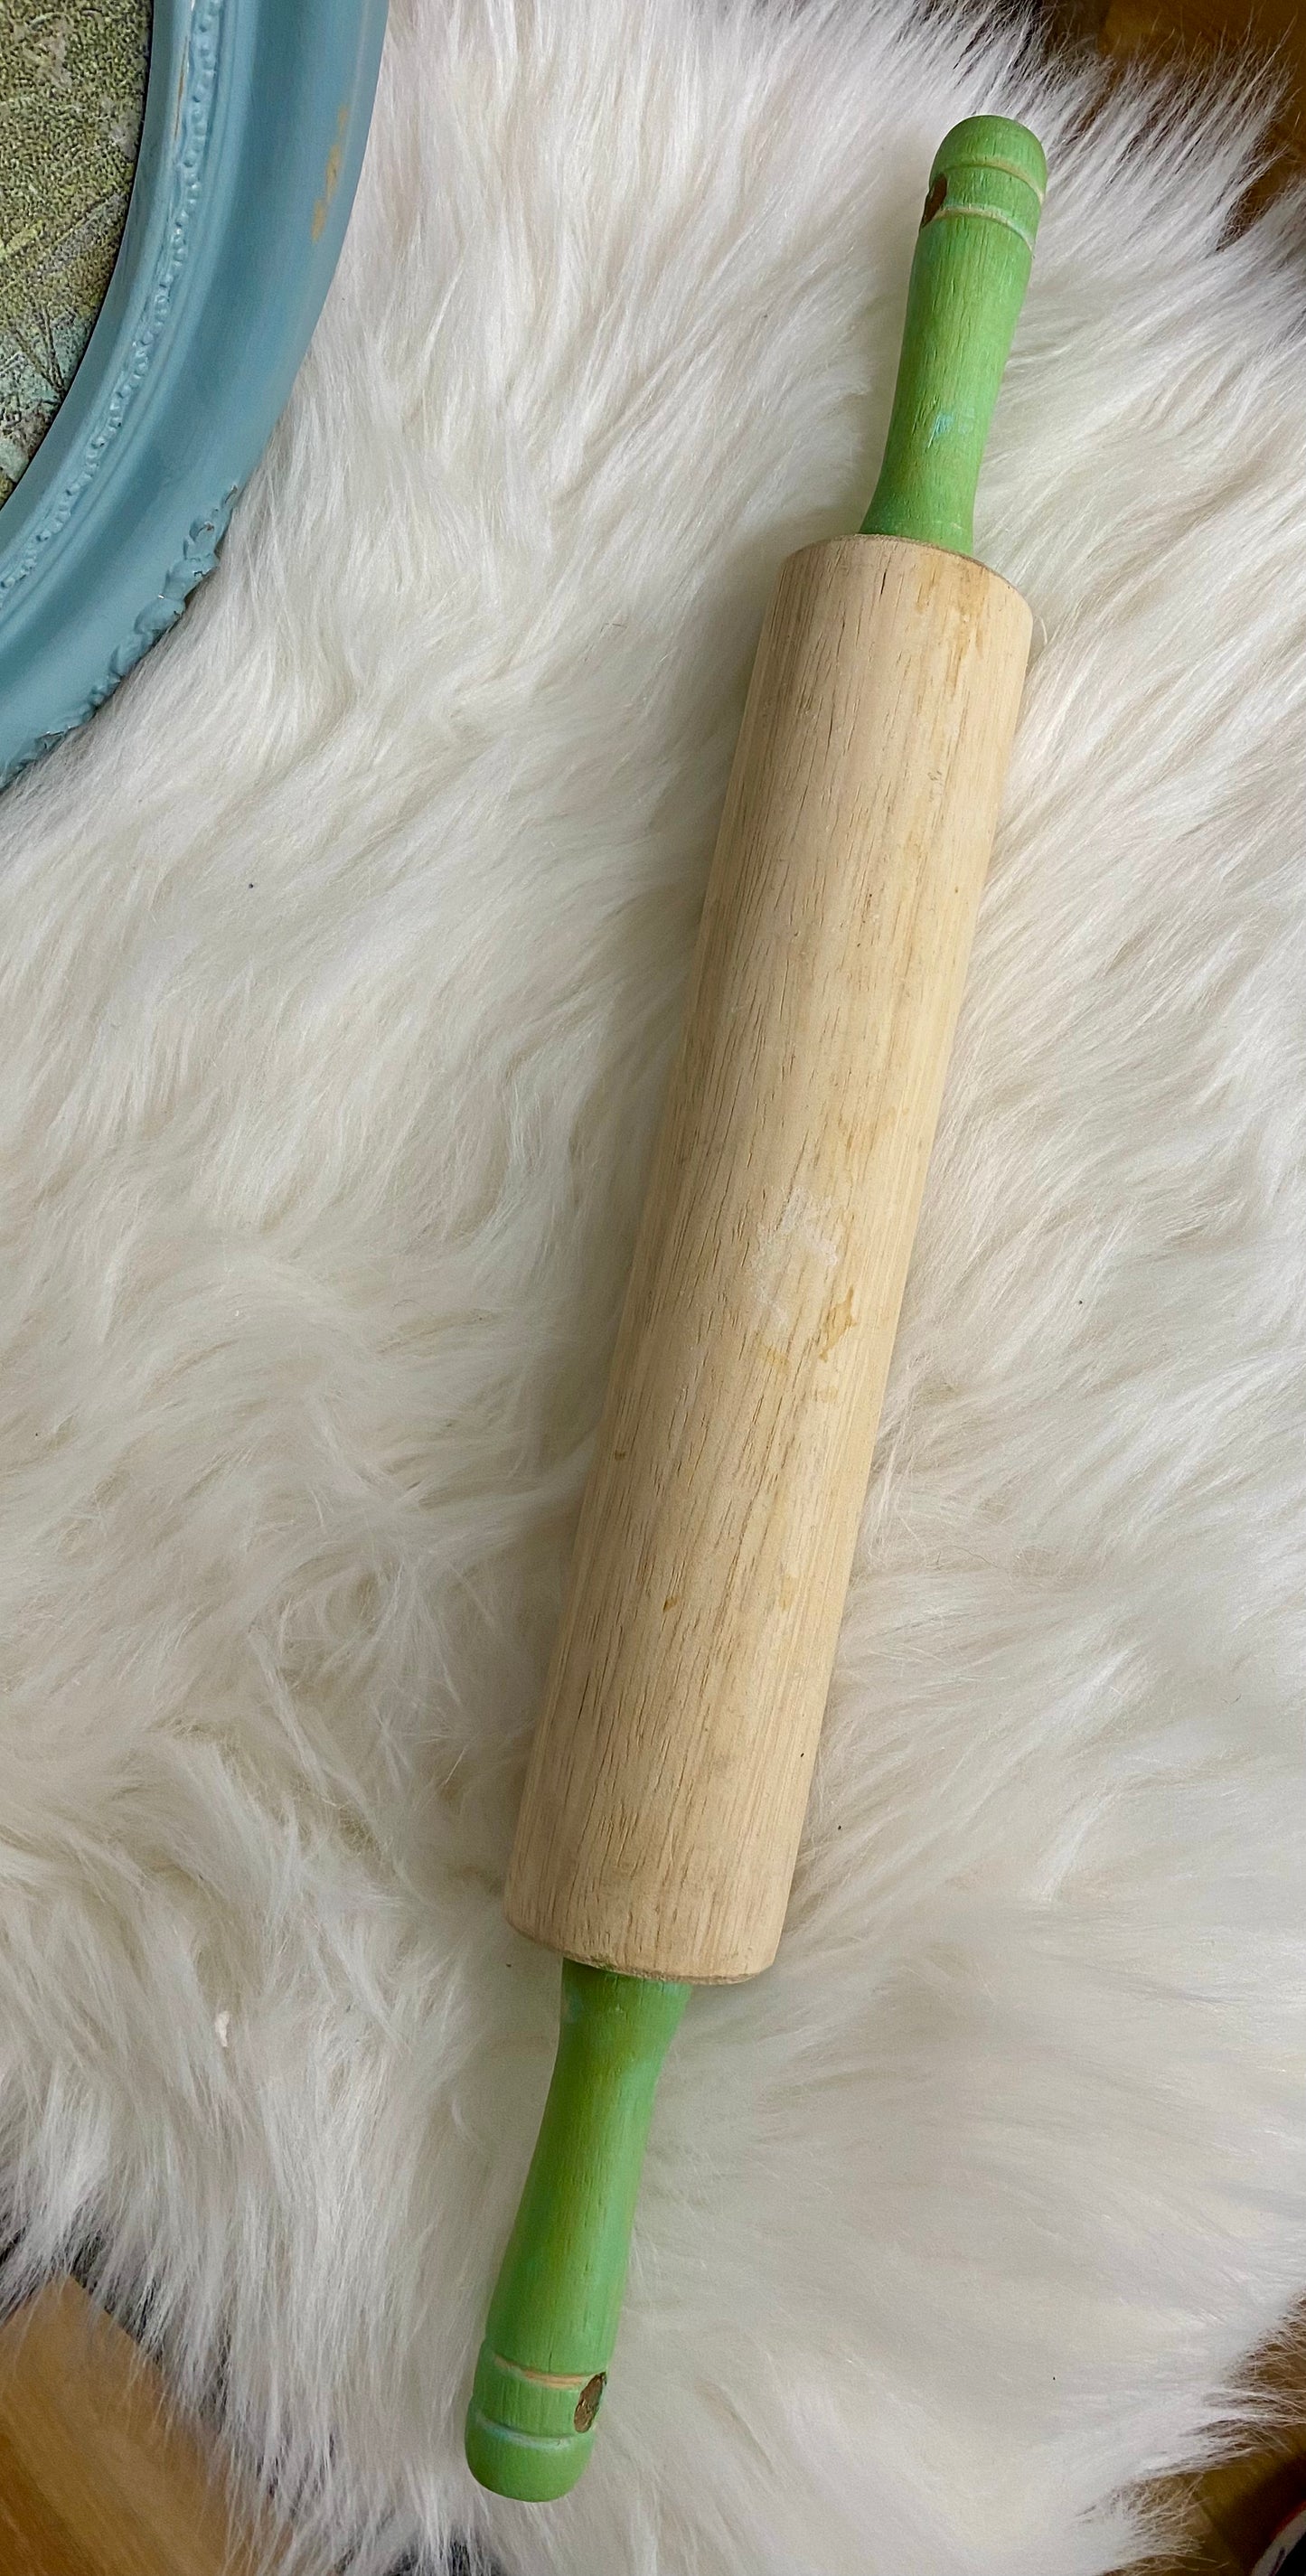 Vintage Wood Rolling Pin with Light Green Handles